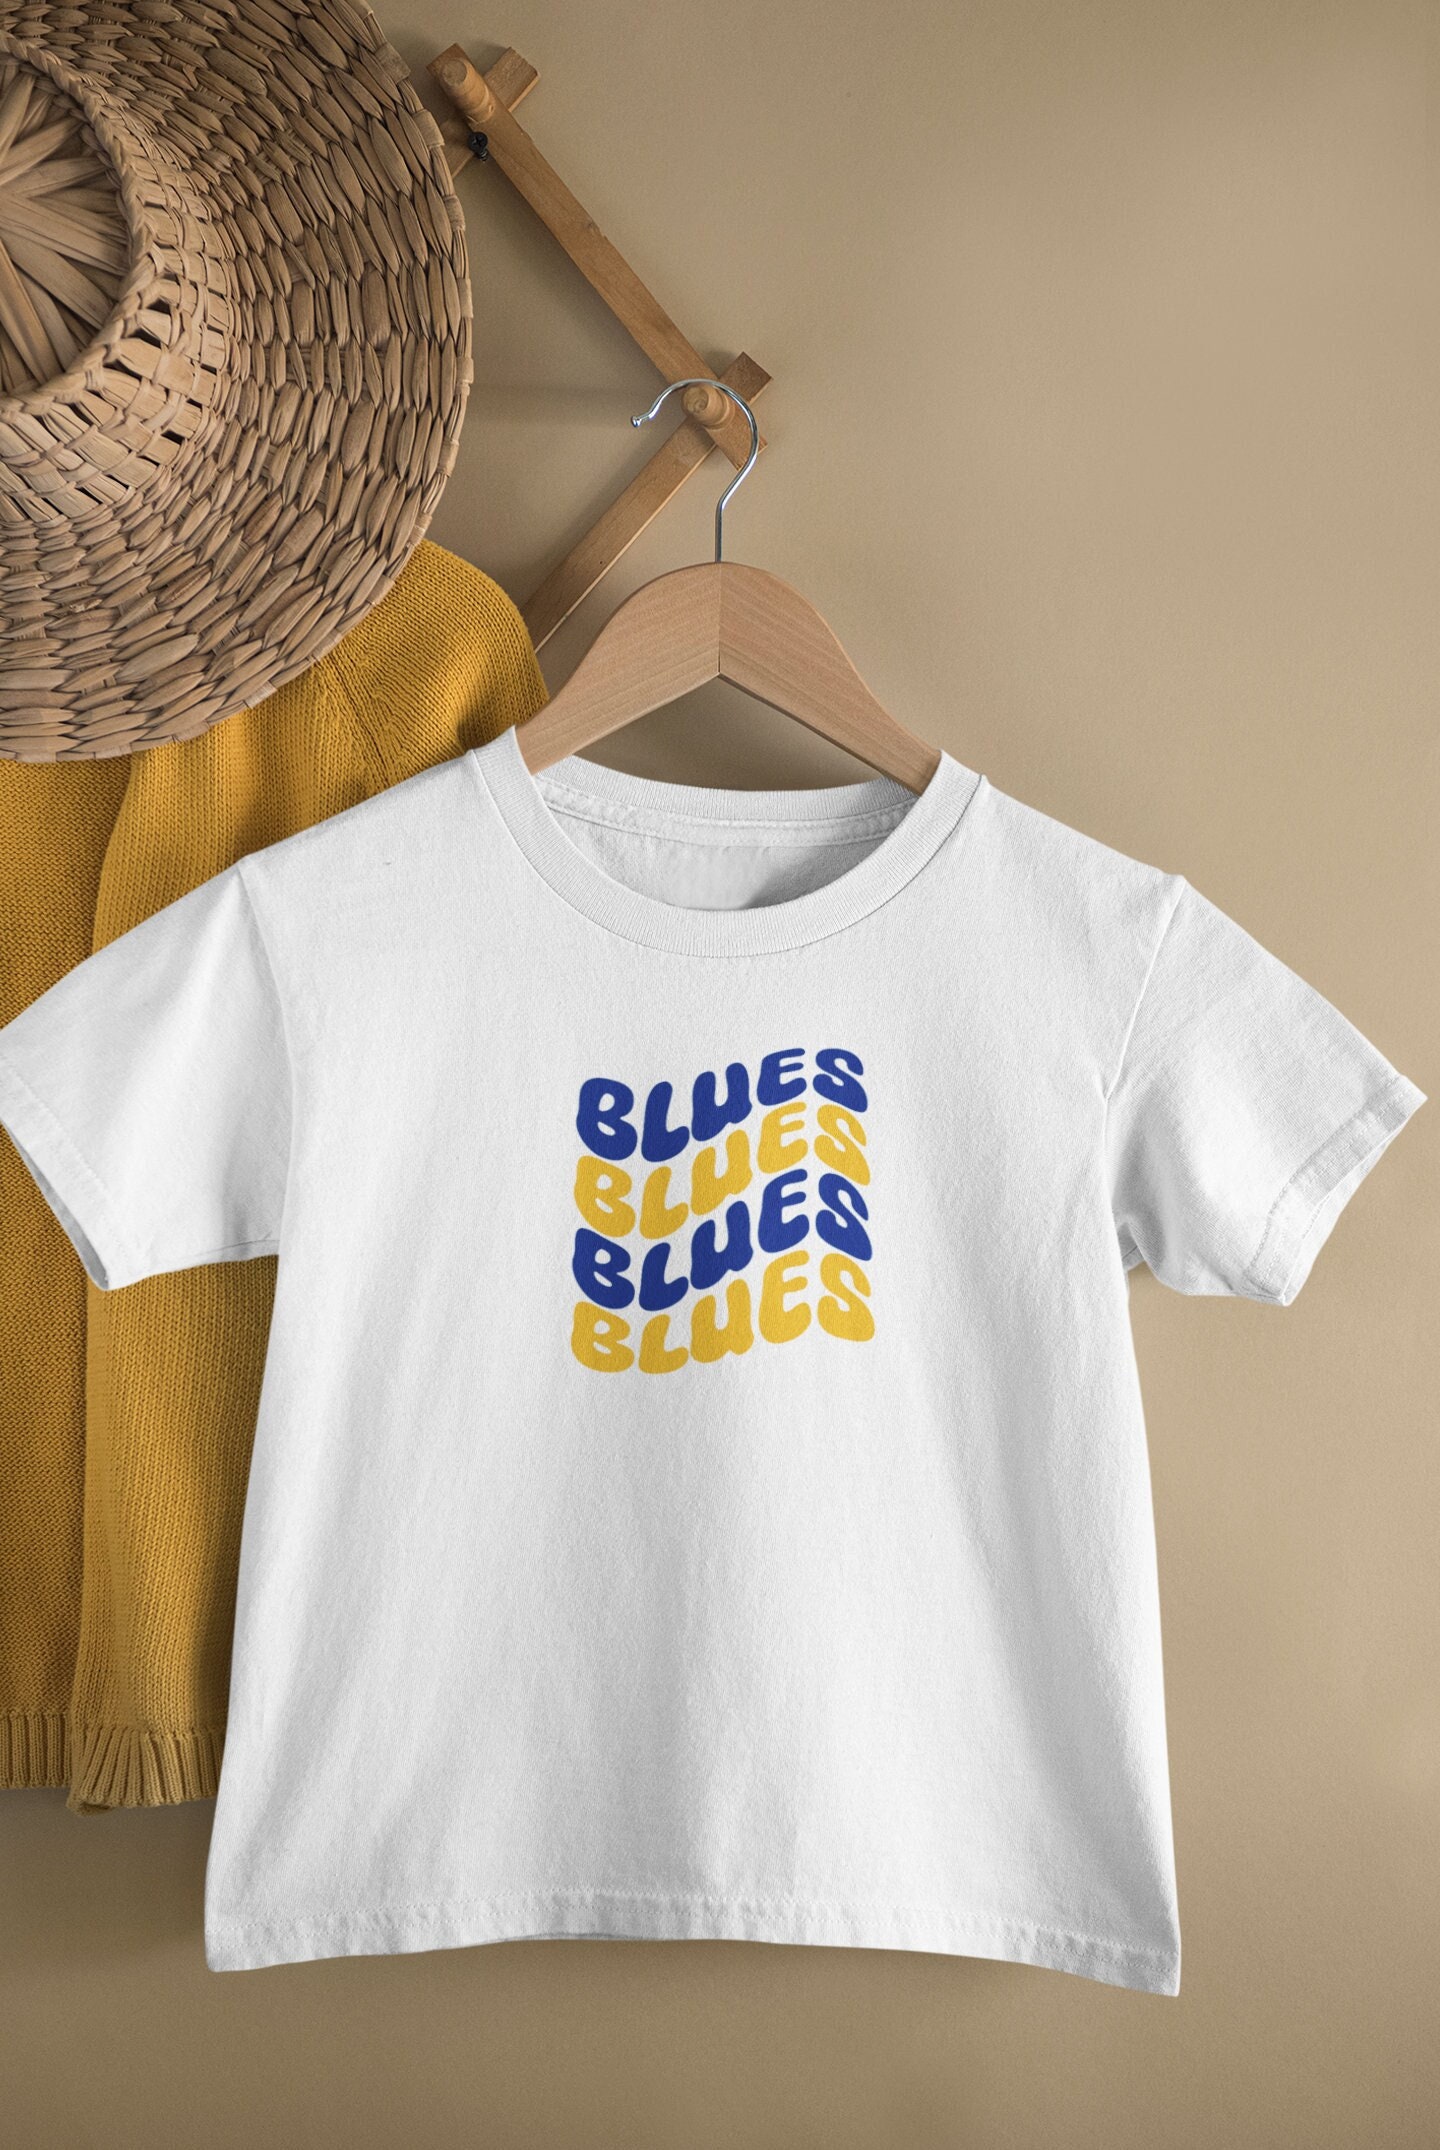 She Asked Me To Tell Her Two Words St. Louis Blues T Shirts – Best Funny  Store